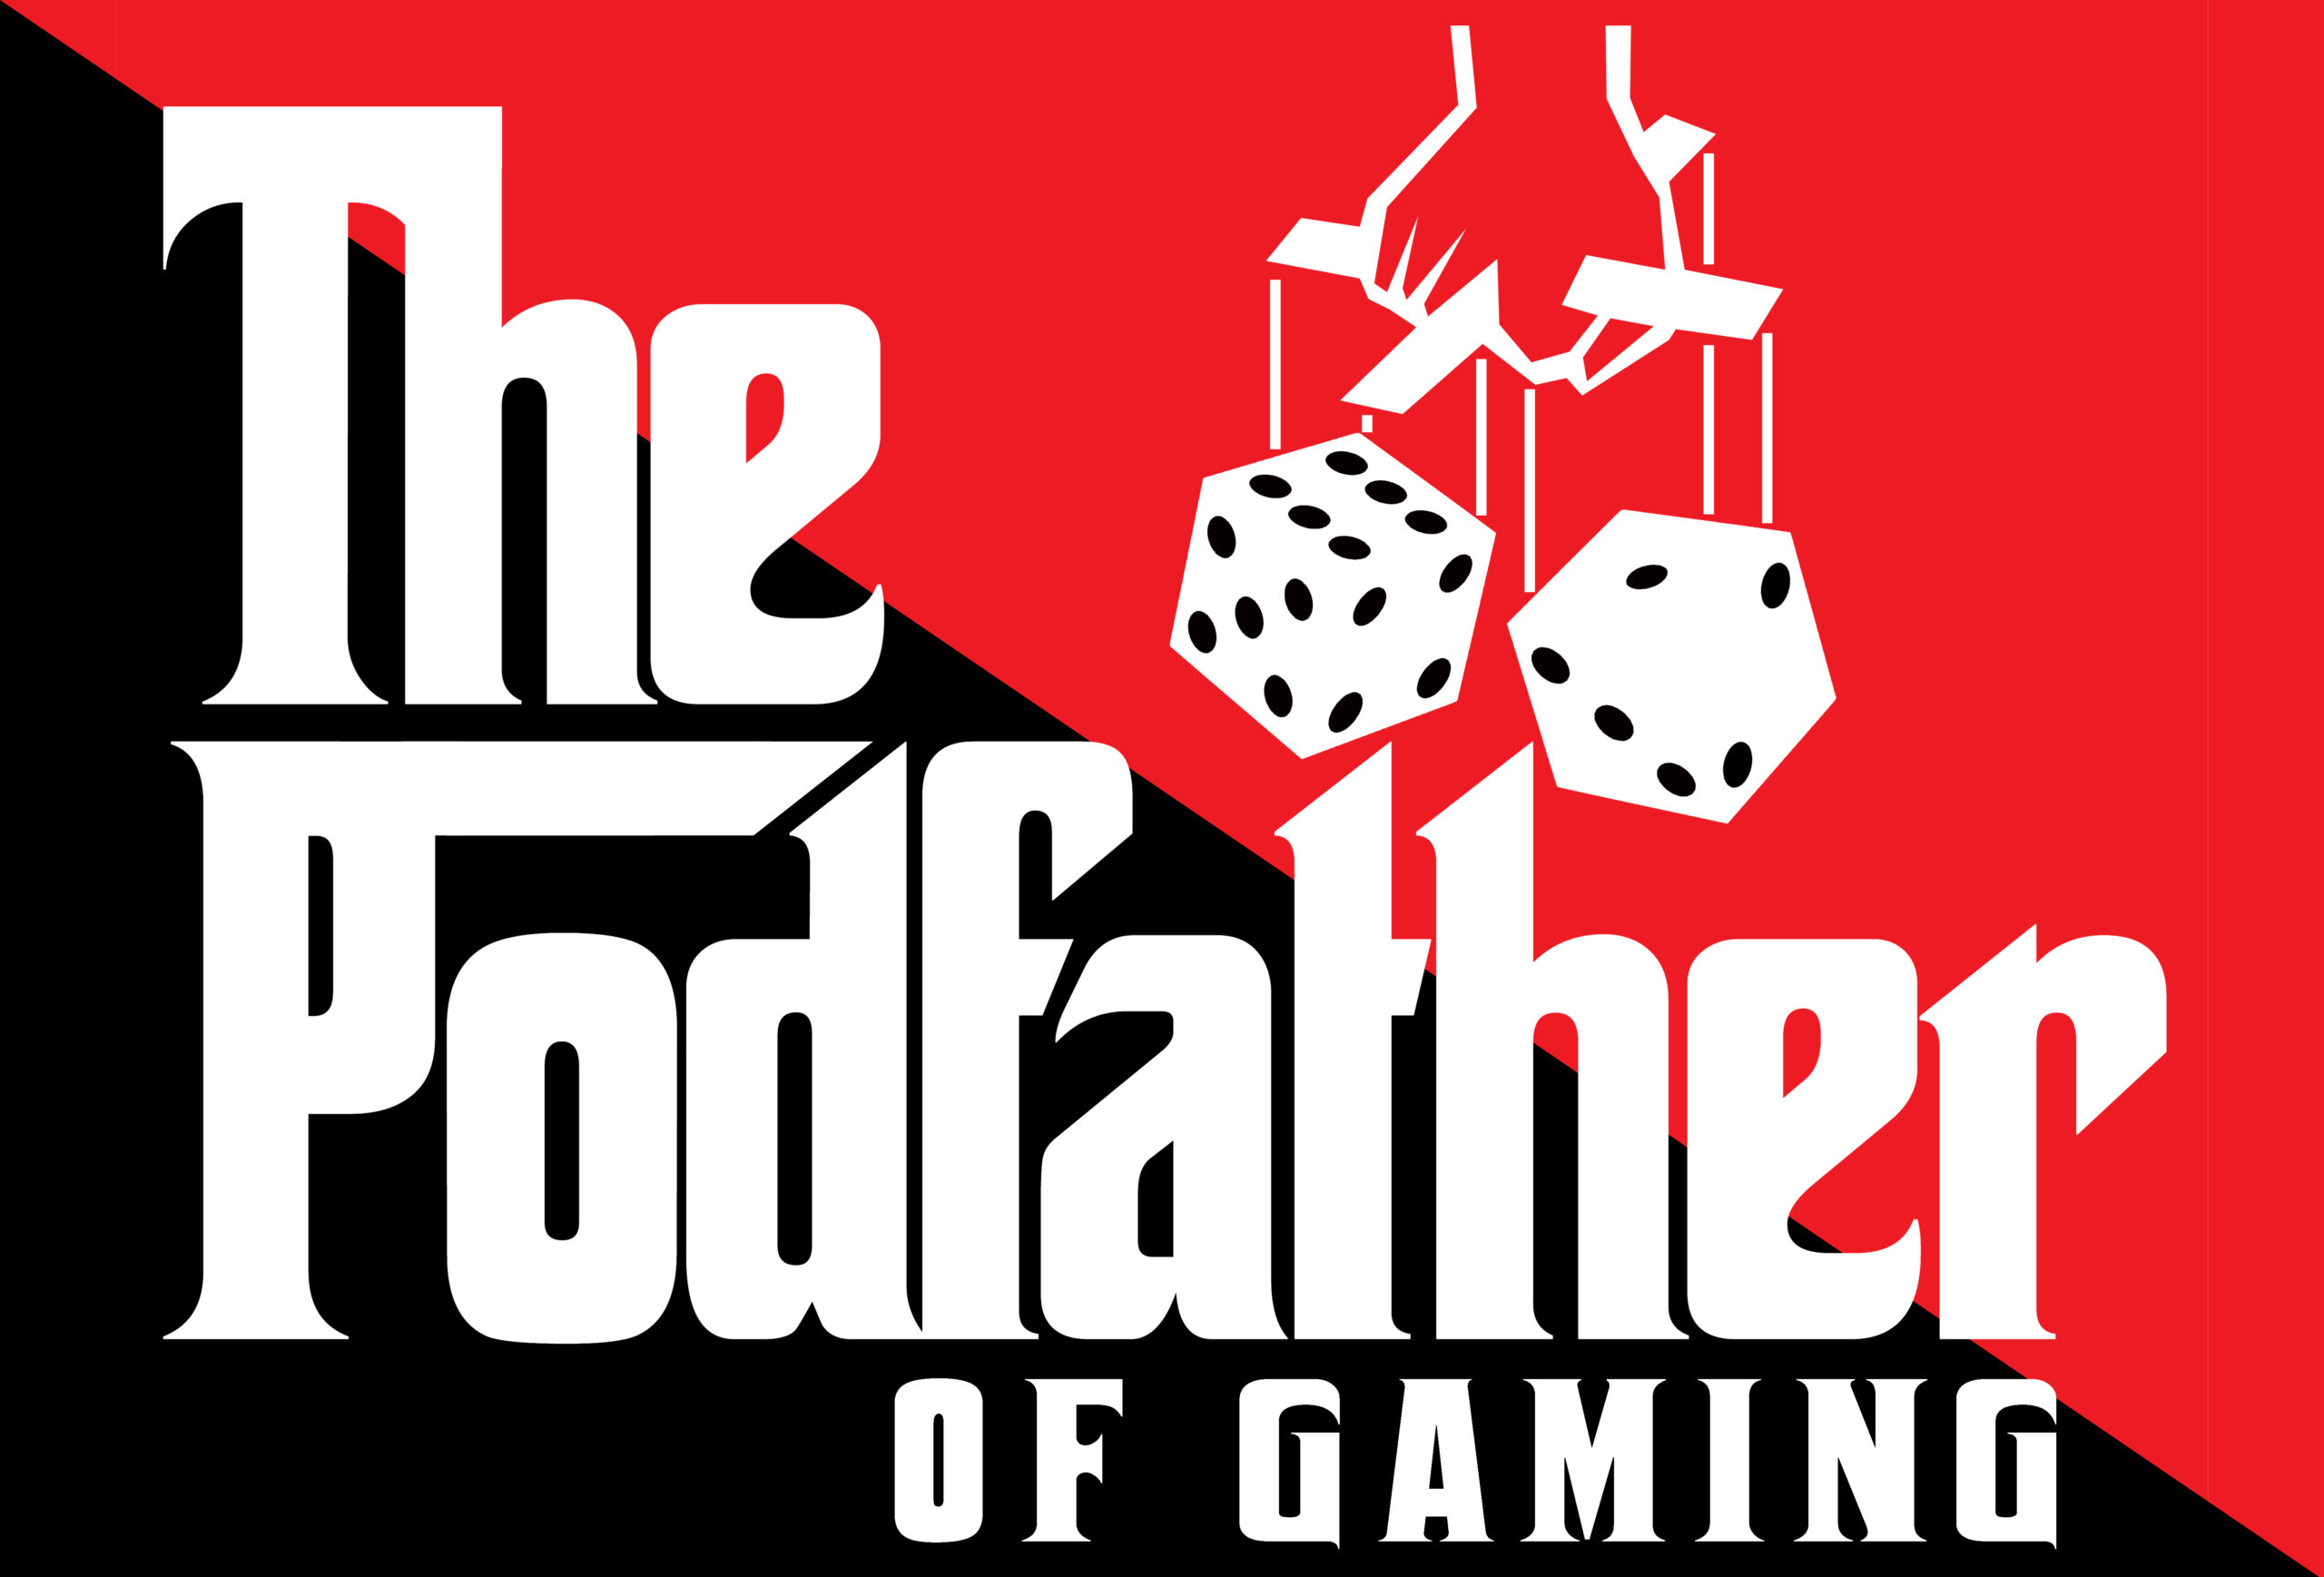 The Podfather of Gaming